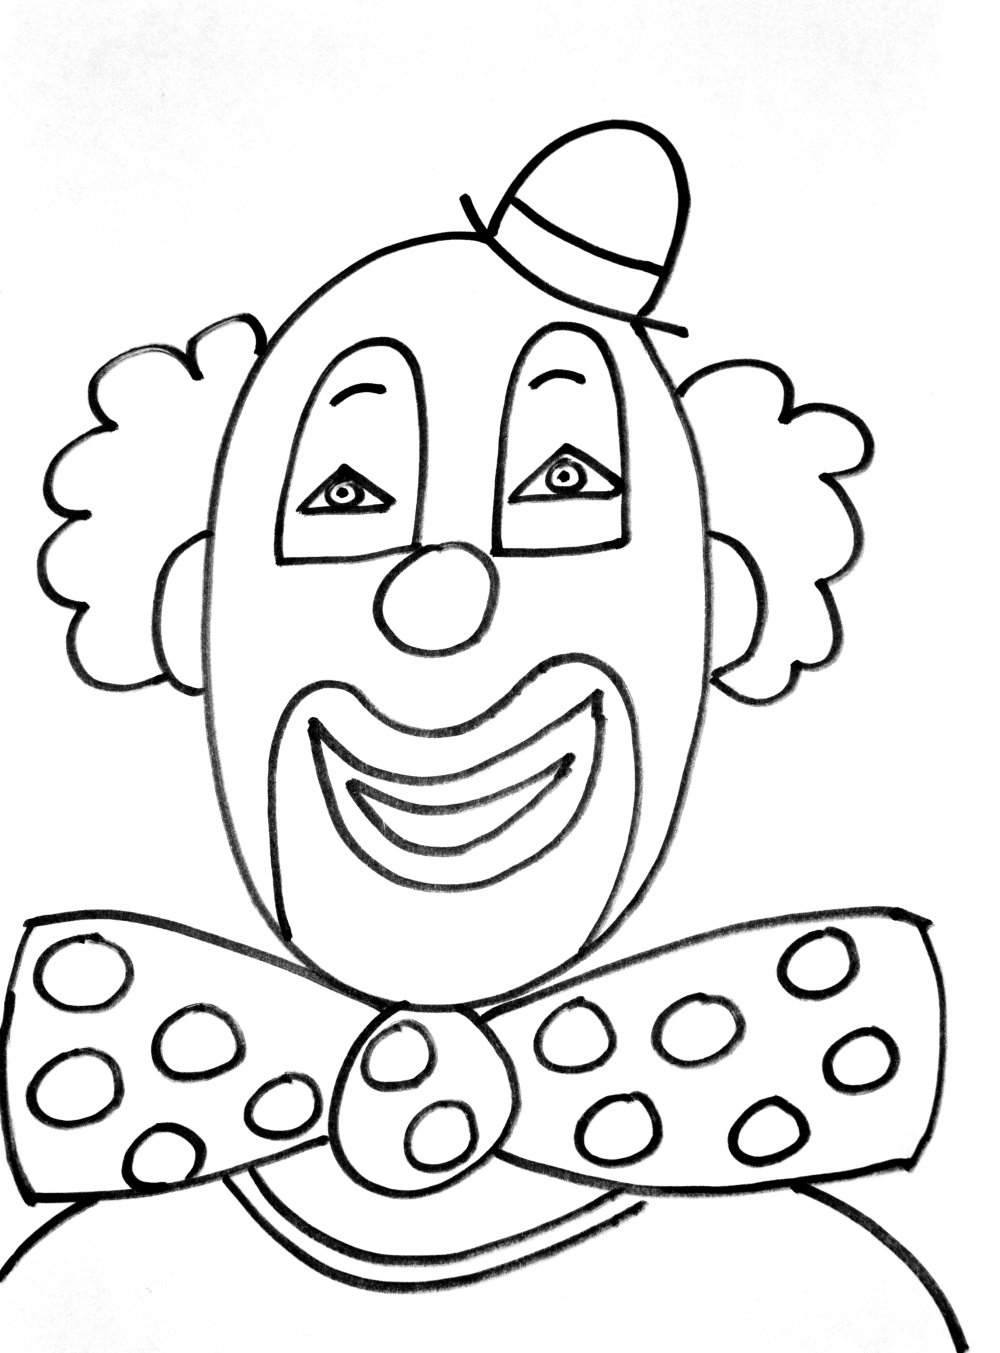 A nice simple clown to color